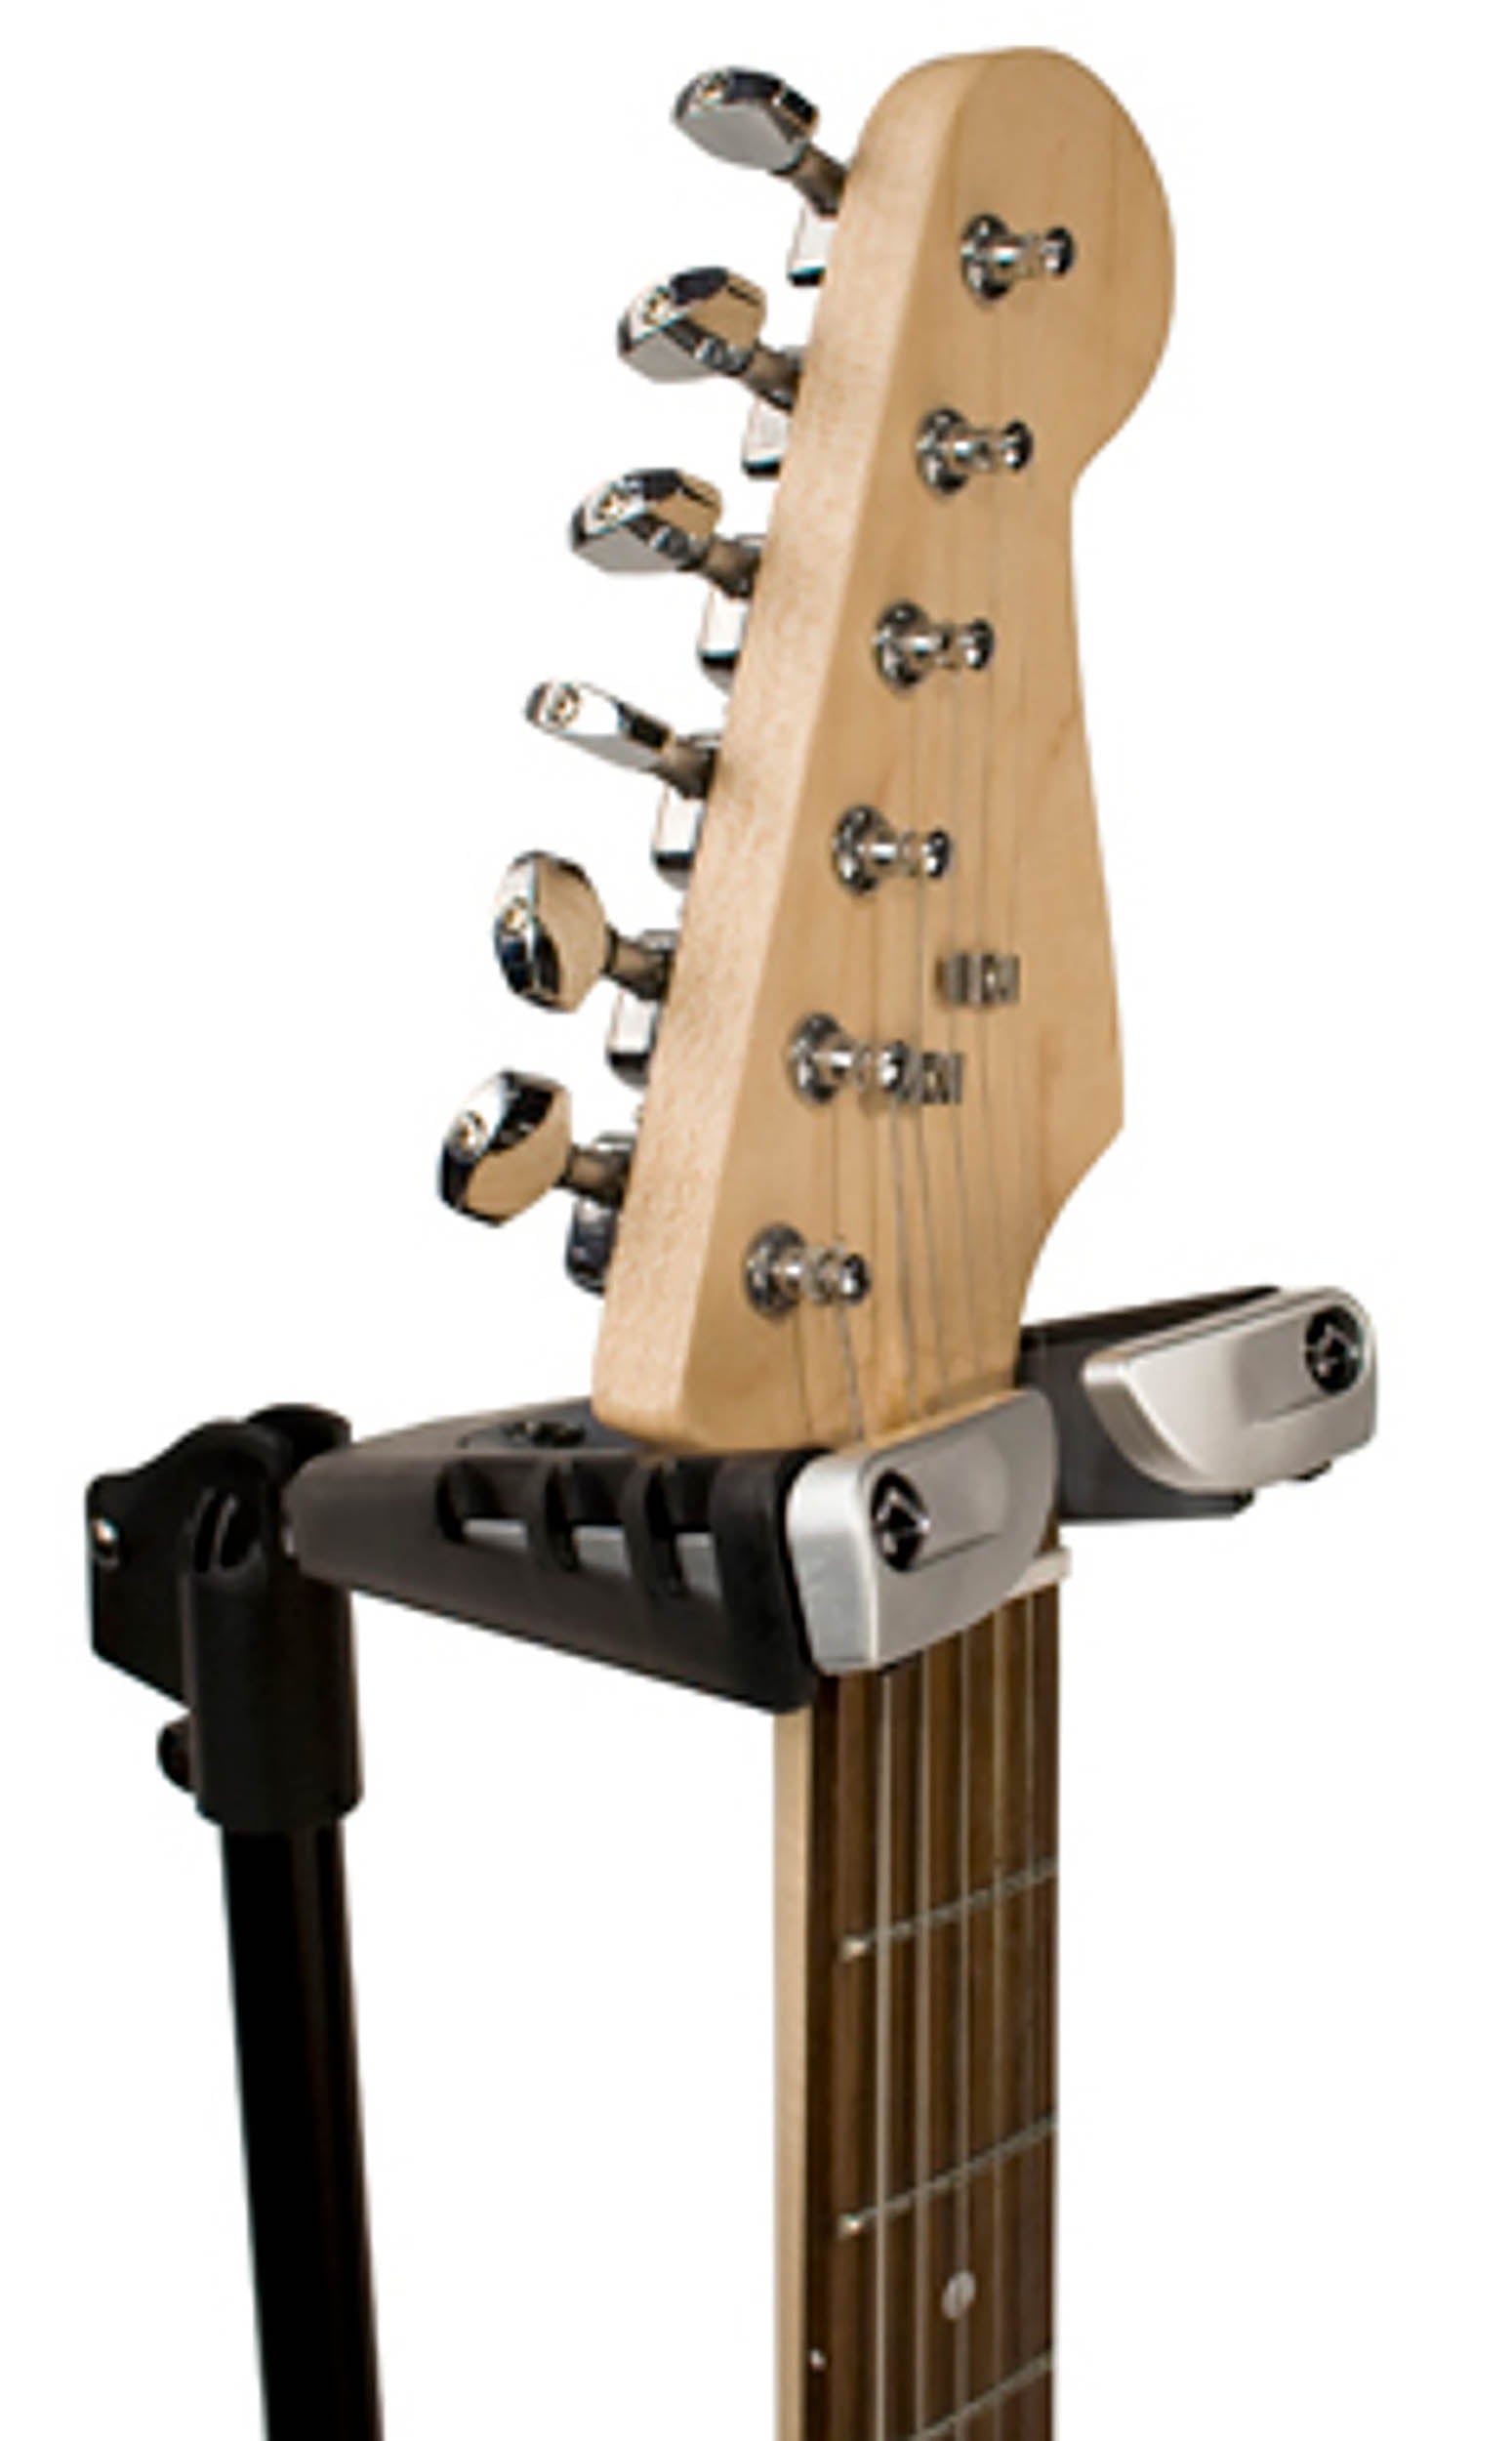 Ultimate Support GS-1000, Genesis Series Locking Leg/Yoke Guitar Stand by Ultimate Support